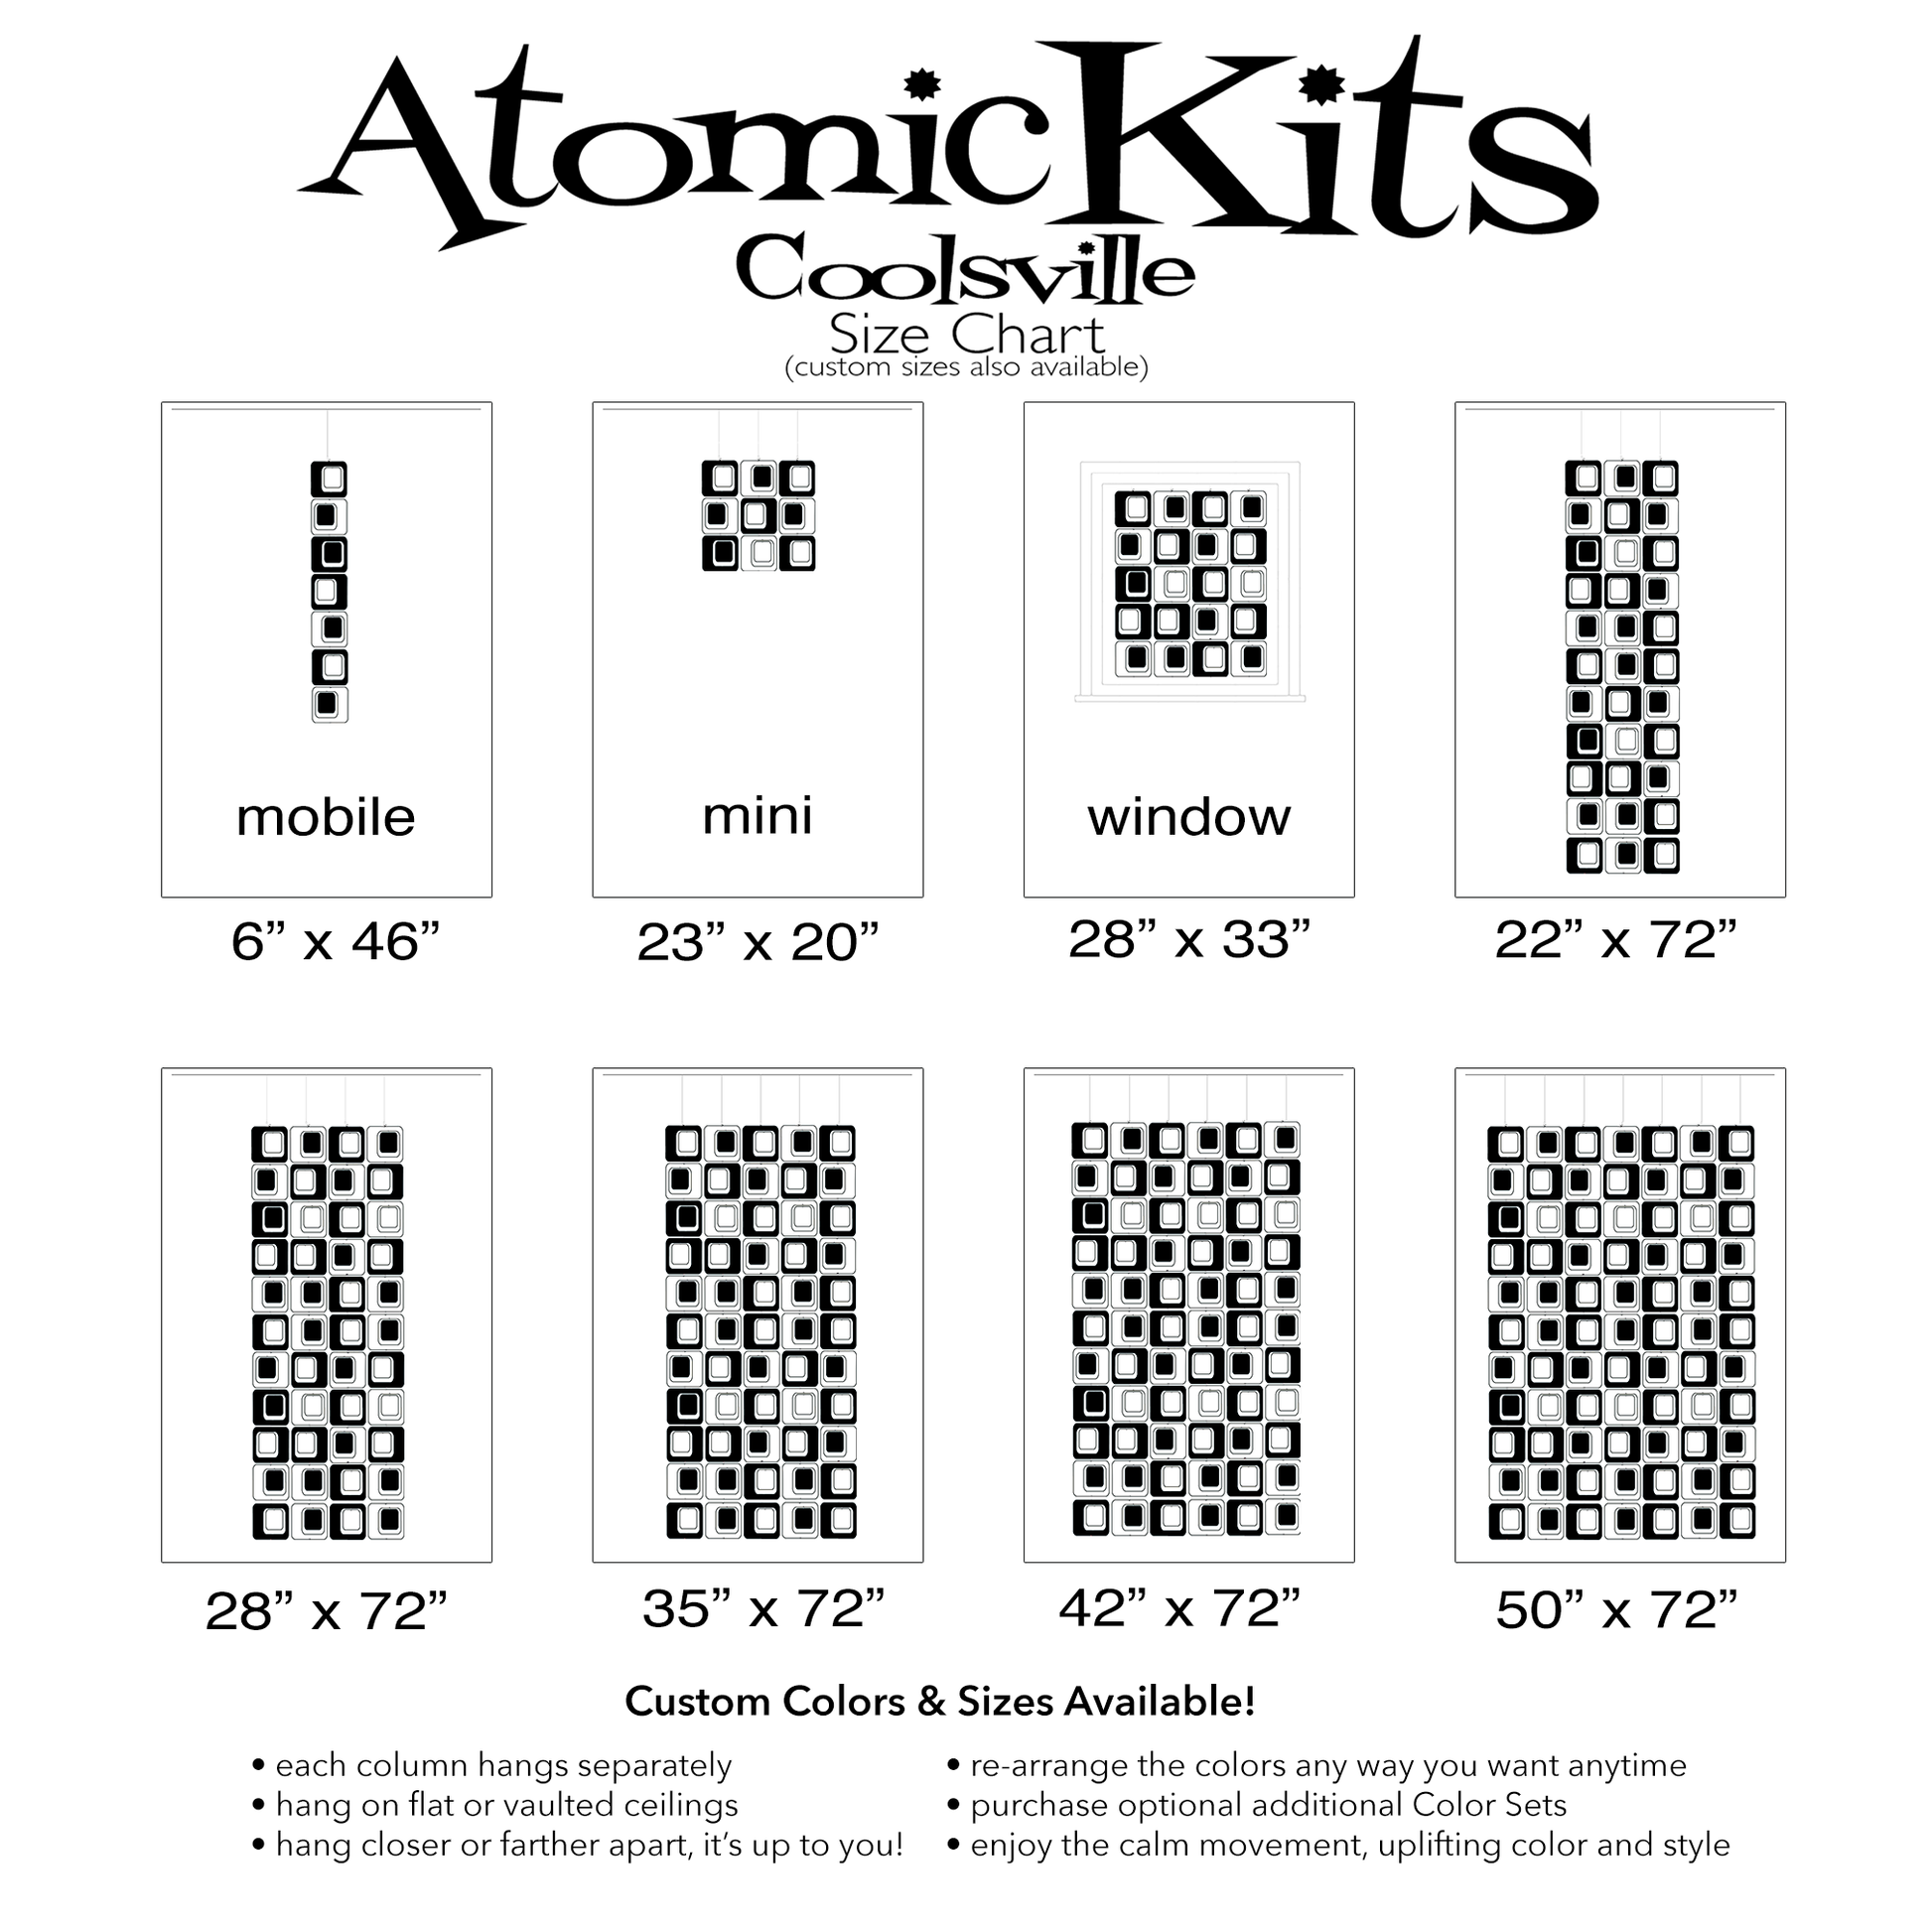 Size Chart for Coolsville in Black and White Colors for Room Dividers, Curtains, Mobiles, and Wall Art DIY KIT by AtomicMobiles.com